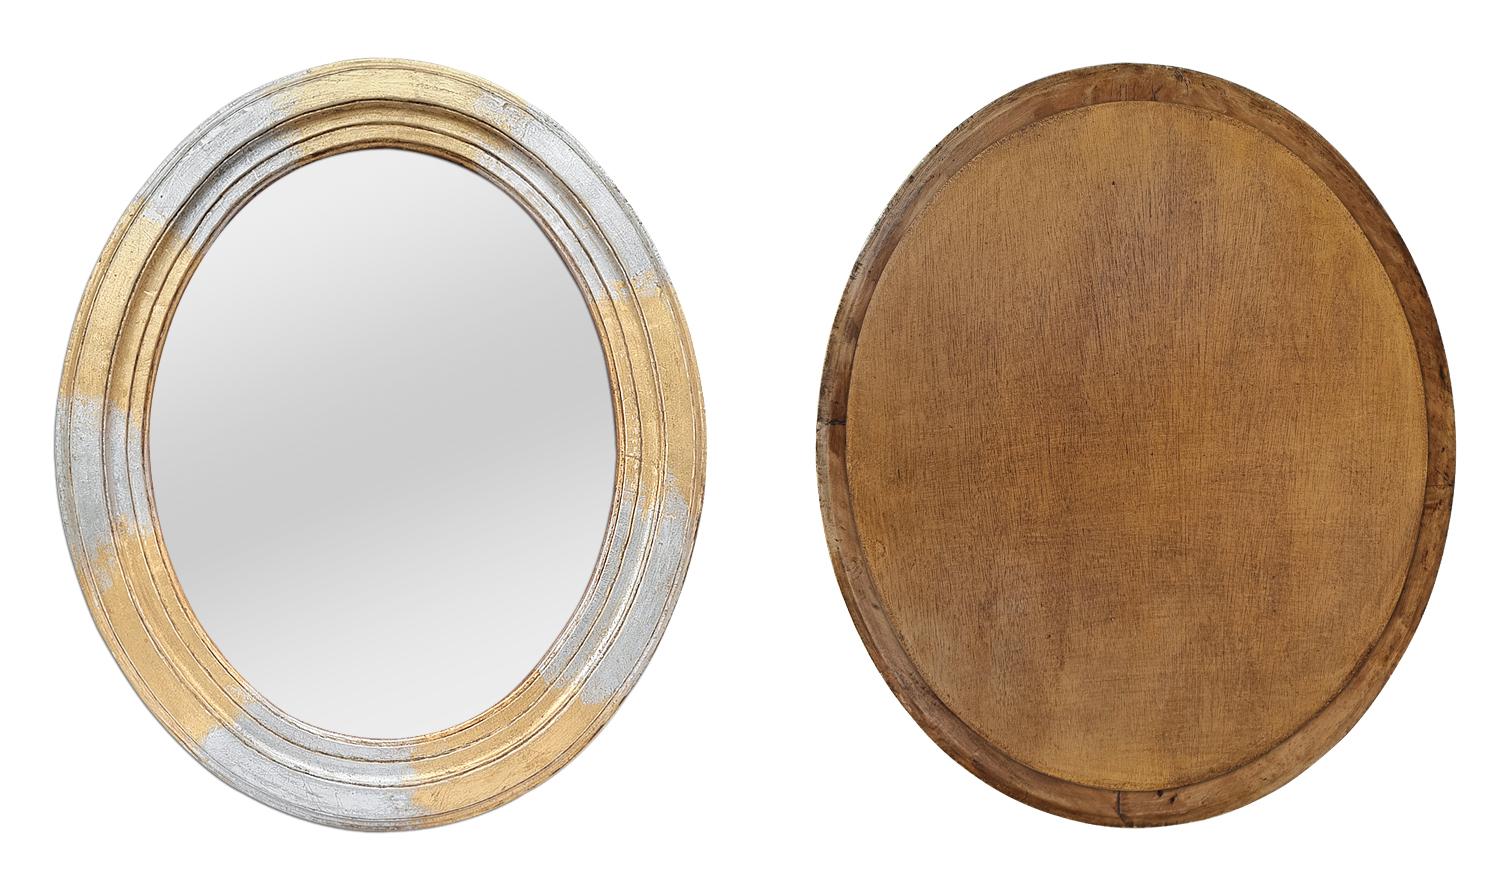 Antique Oval Mirror, Silverwood & Giltwood, 1950's In Good Condition For Sale In Paris, FR